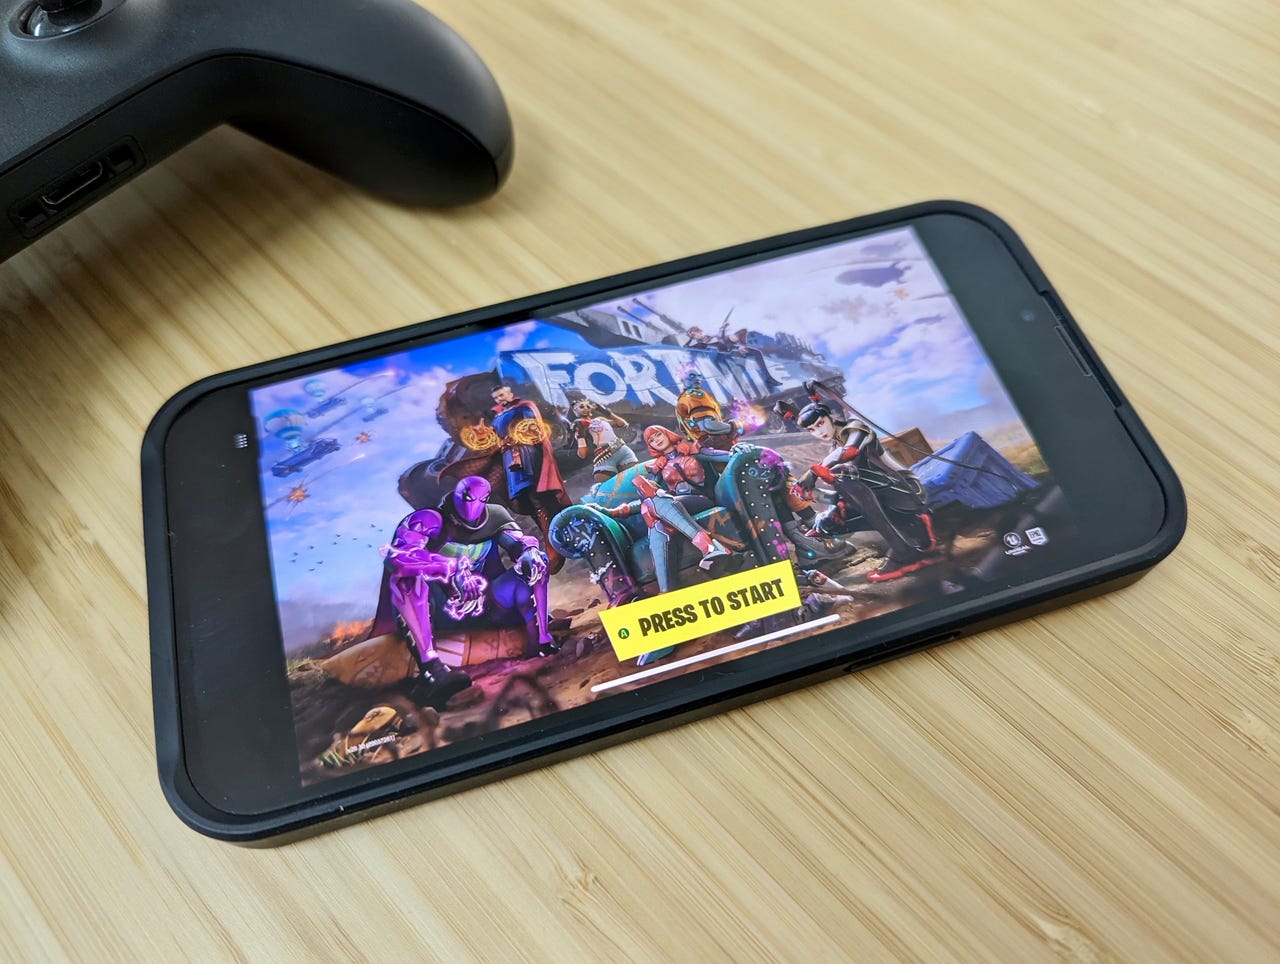 How to play Fortnite on iPhone